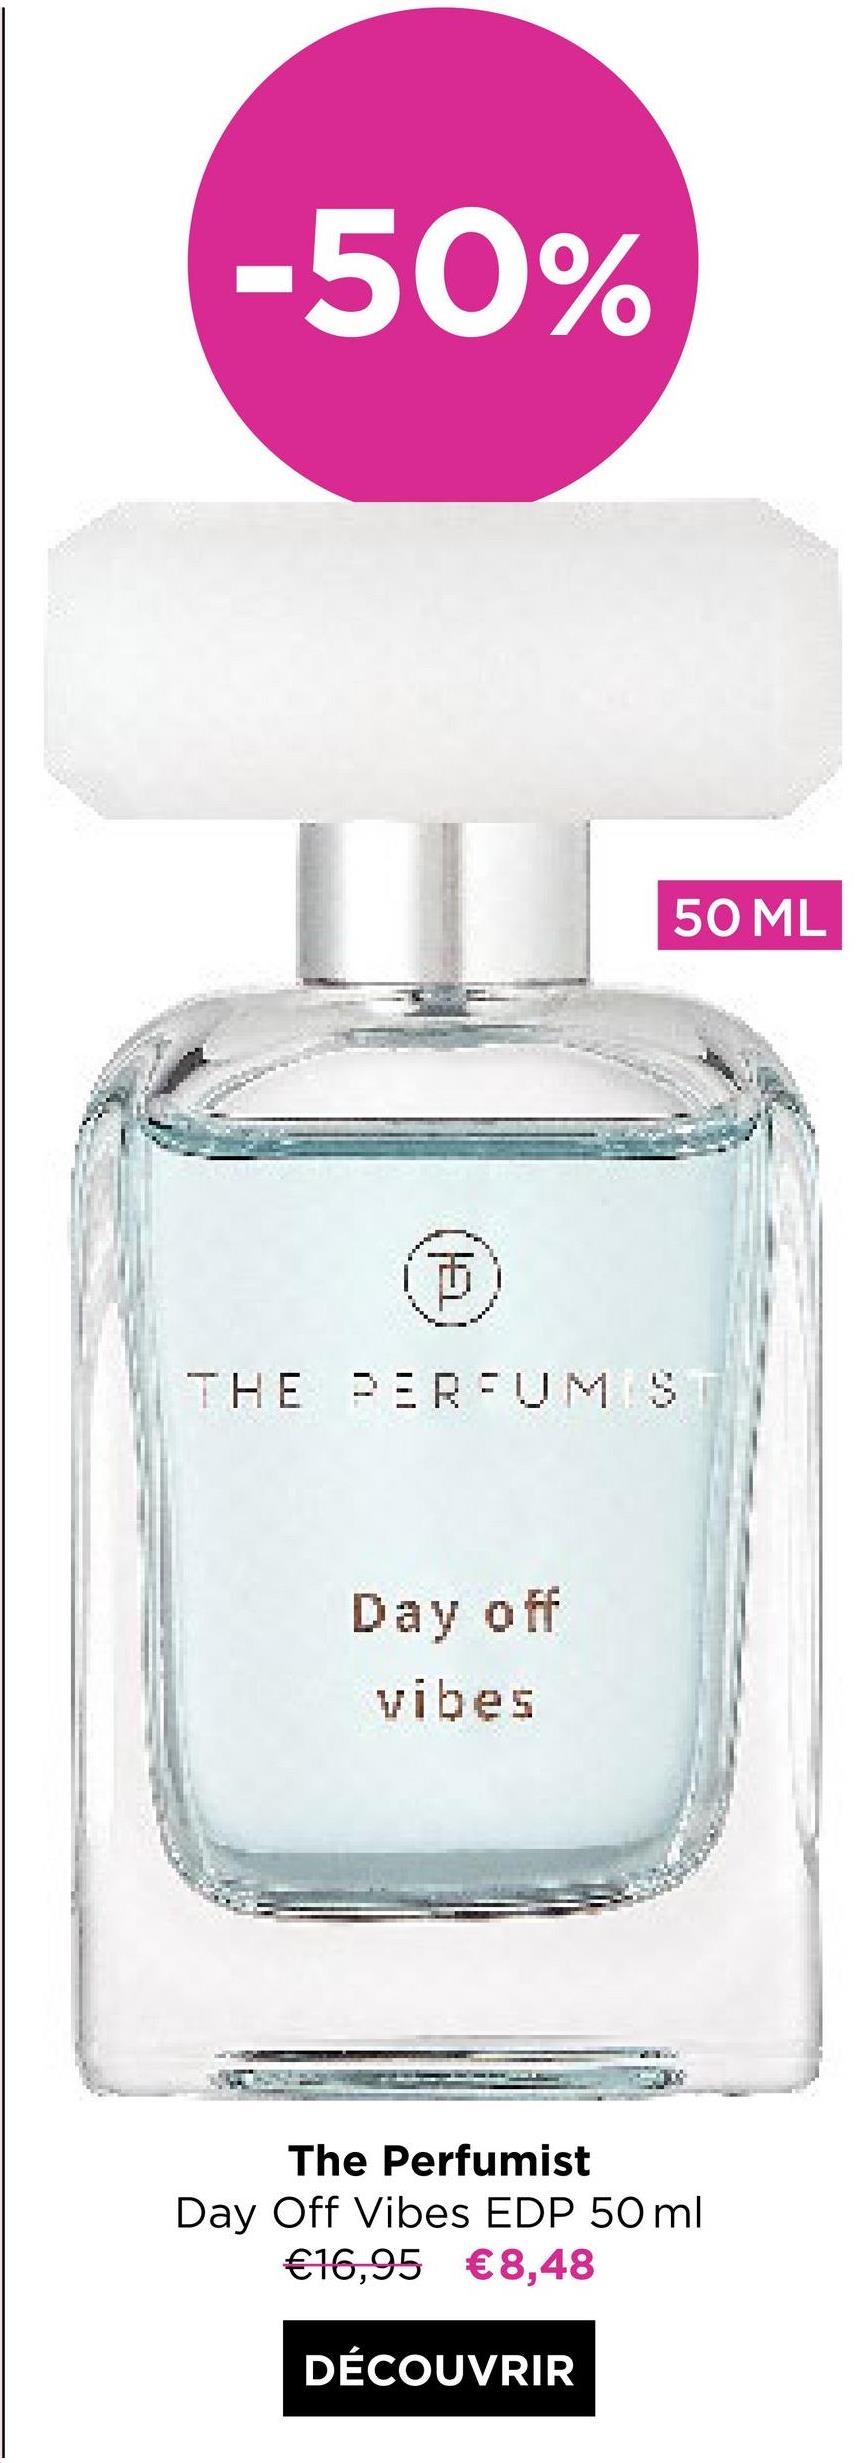 -50%
www
E
THE PERFUM S
Day off
vibes
50 ML
The Perfumist
Day Off Vibes EDP 50ml
€16,95 €8,48
DÉCOUVRIR